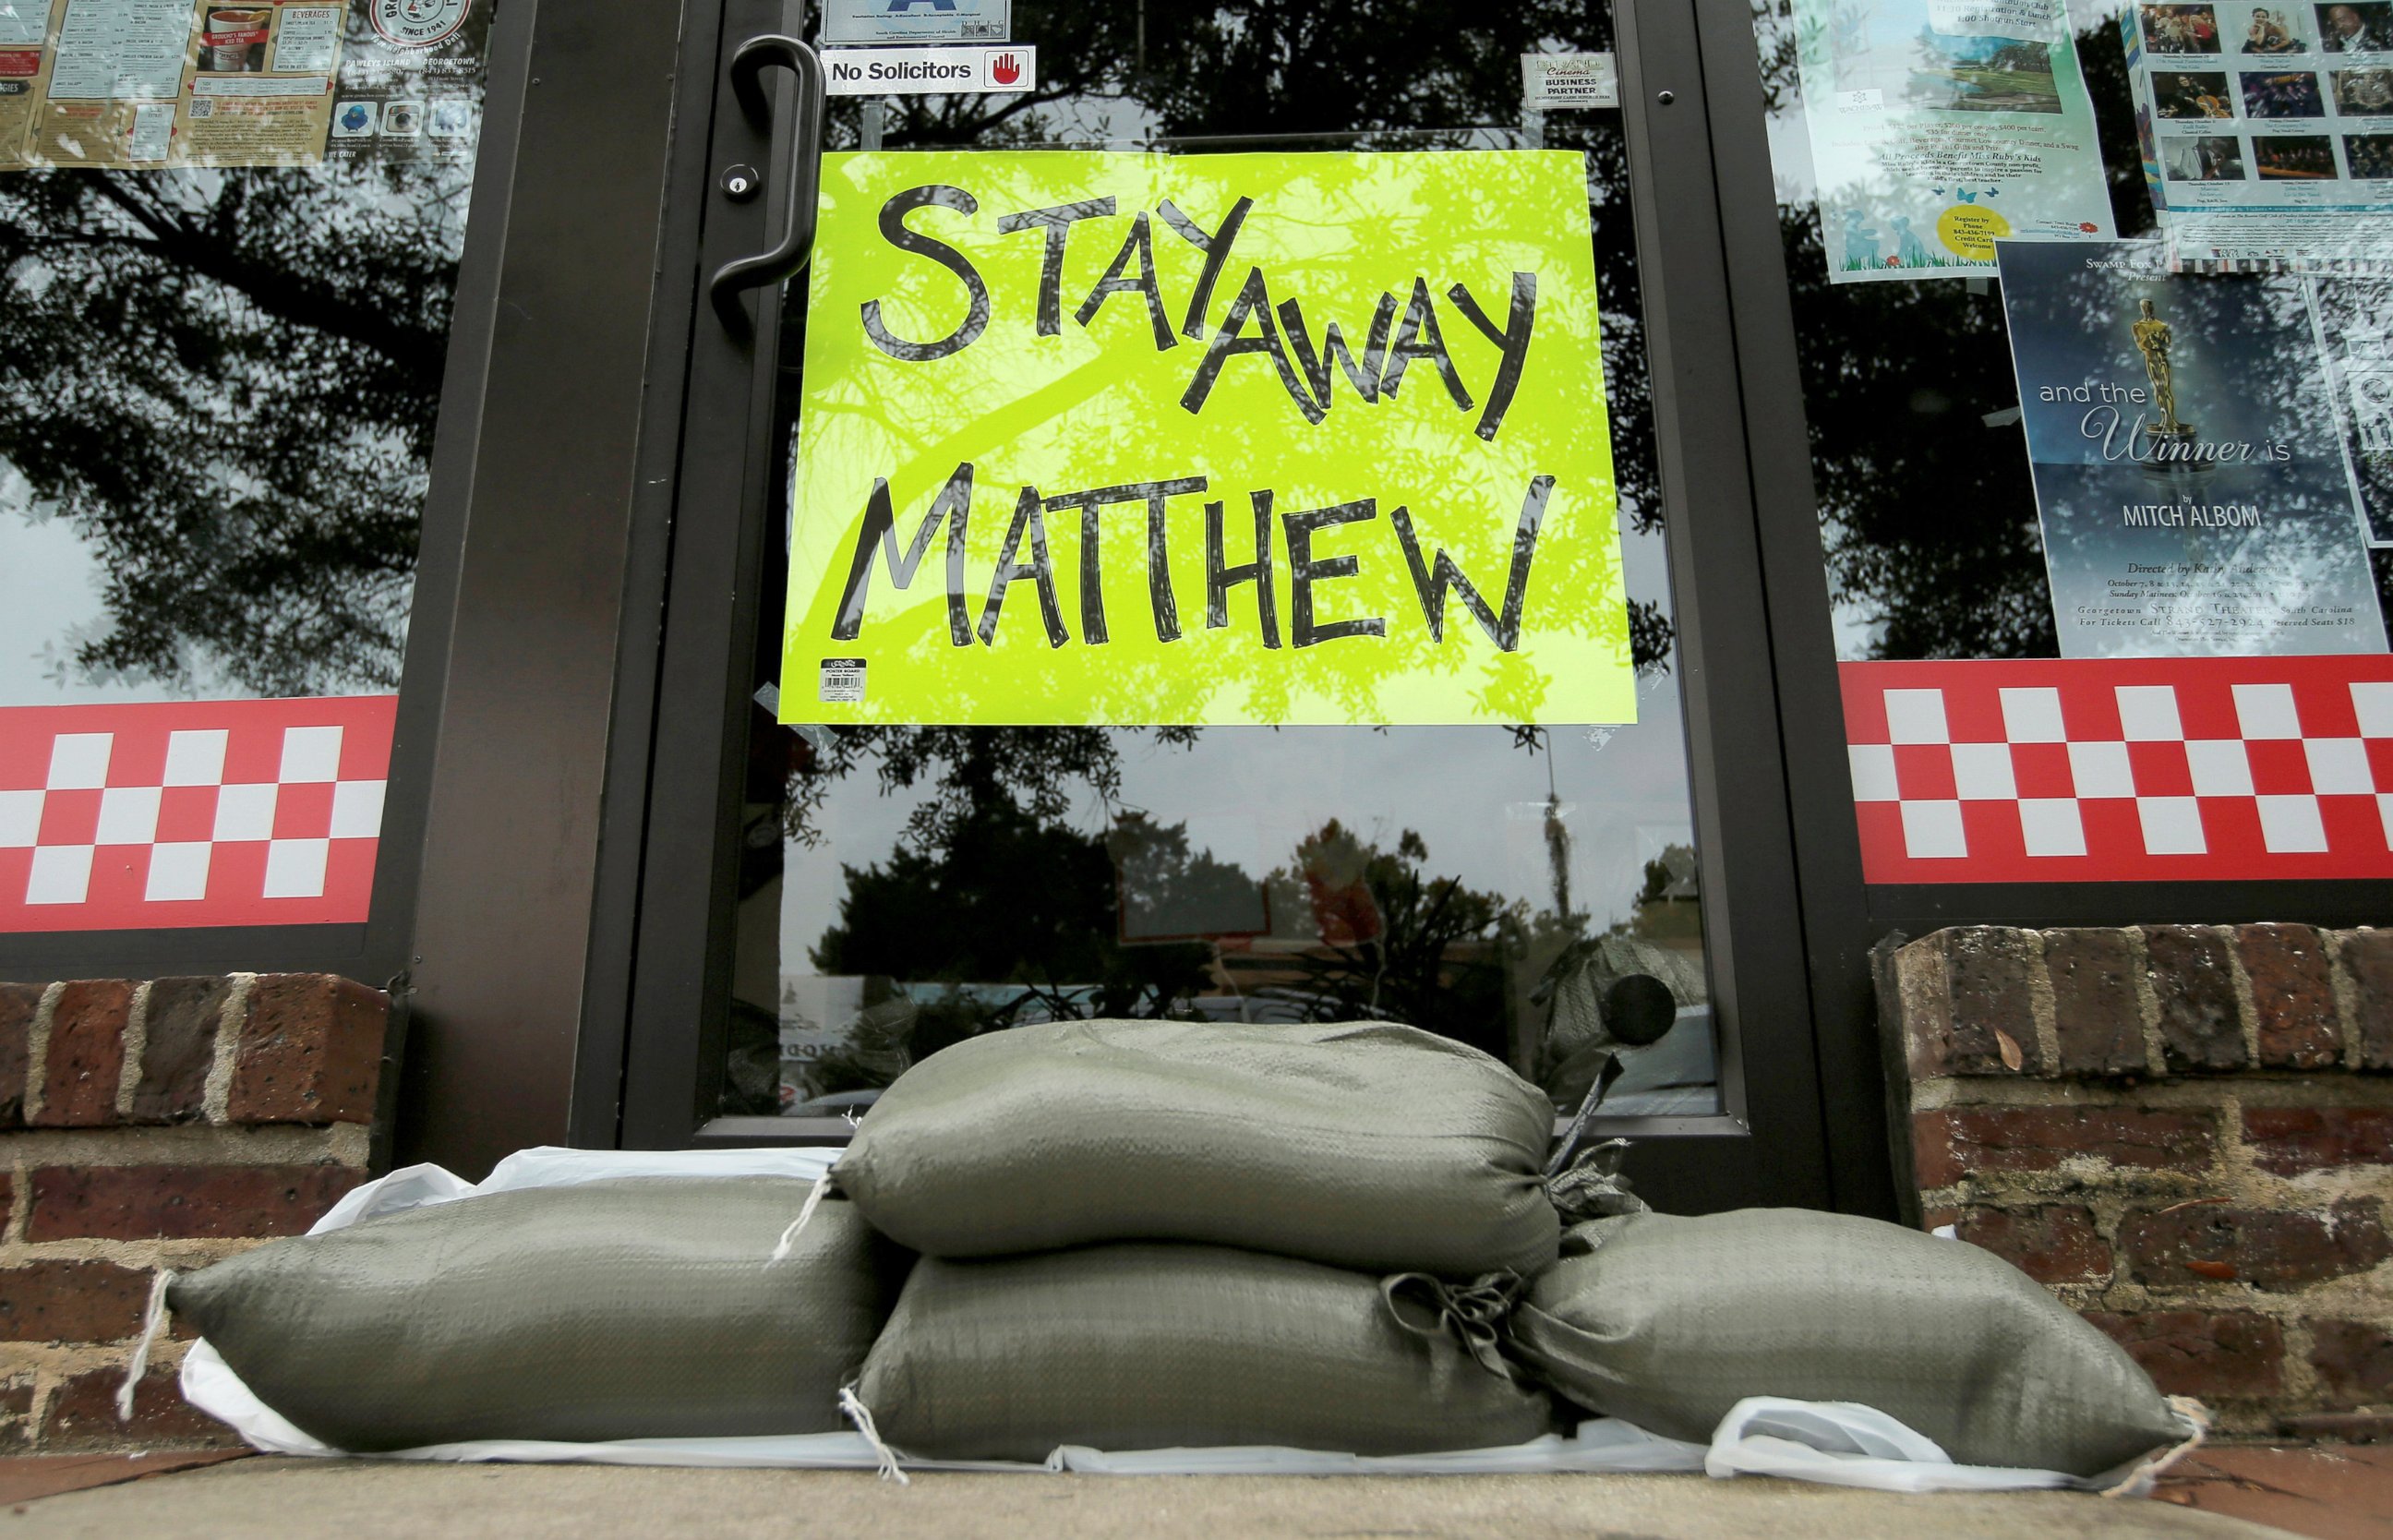 PHOTO: Sandbags are seen in front of a business ahead of Hurricane Matthew in Georgetown, South Carolina, Oct. 6, 2016.